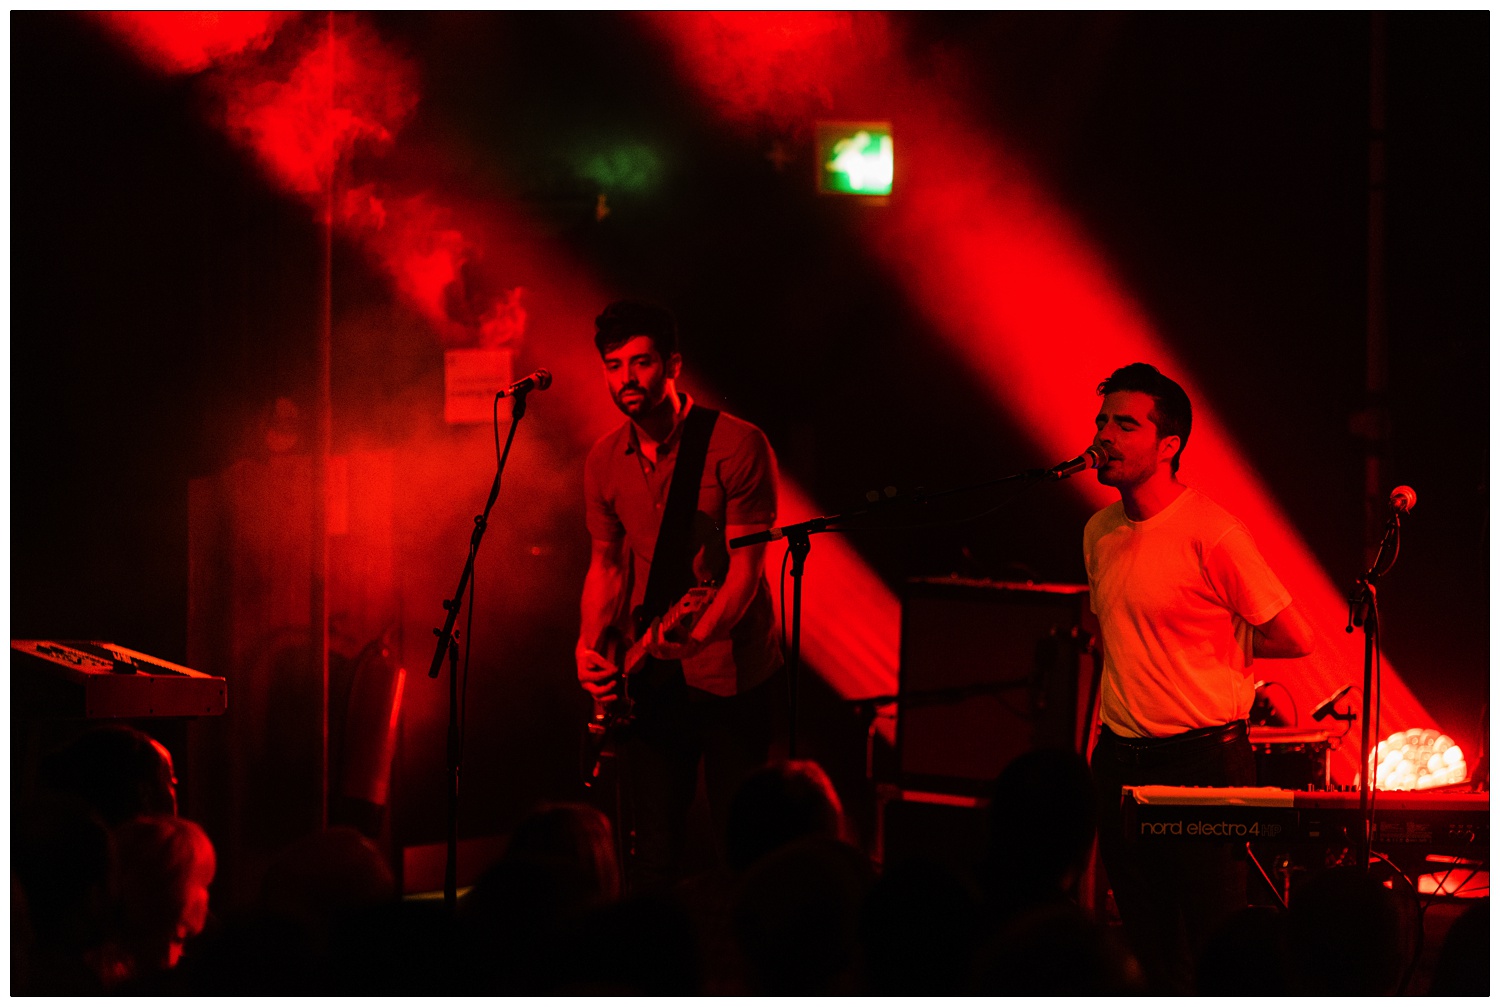 Andrew Smith and Nathan Nicholson of The Boxer Rebellion on stage at Scala in 2014. The lighting is red and some of the audience can be seen.